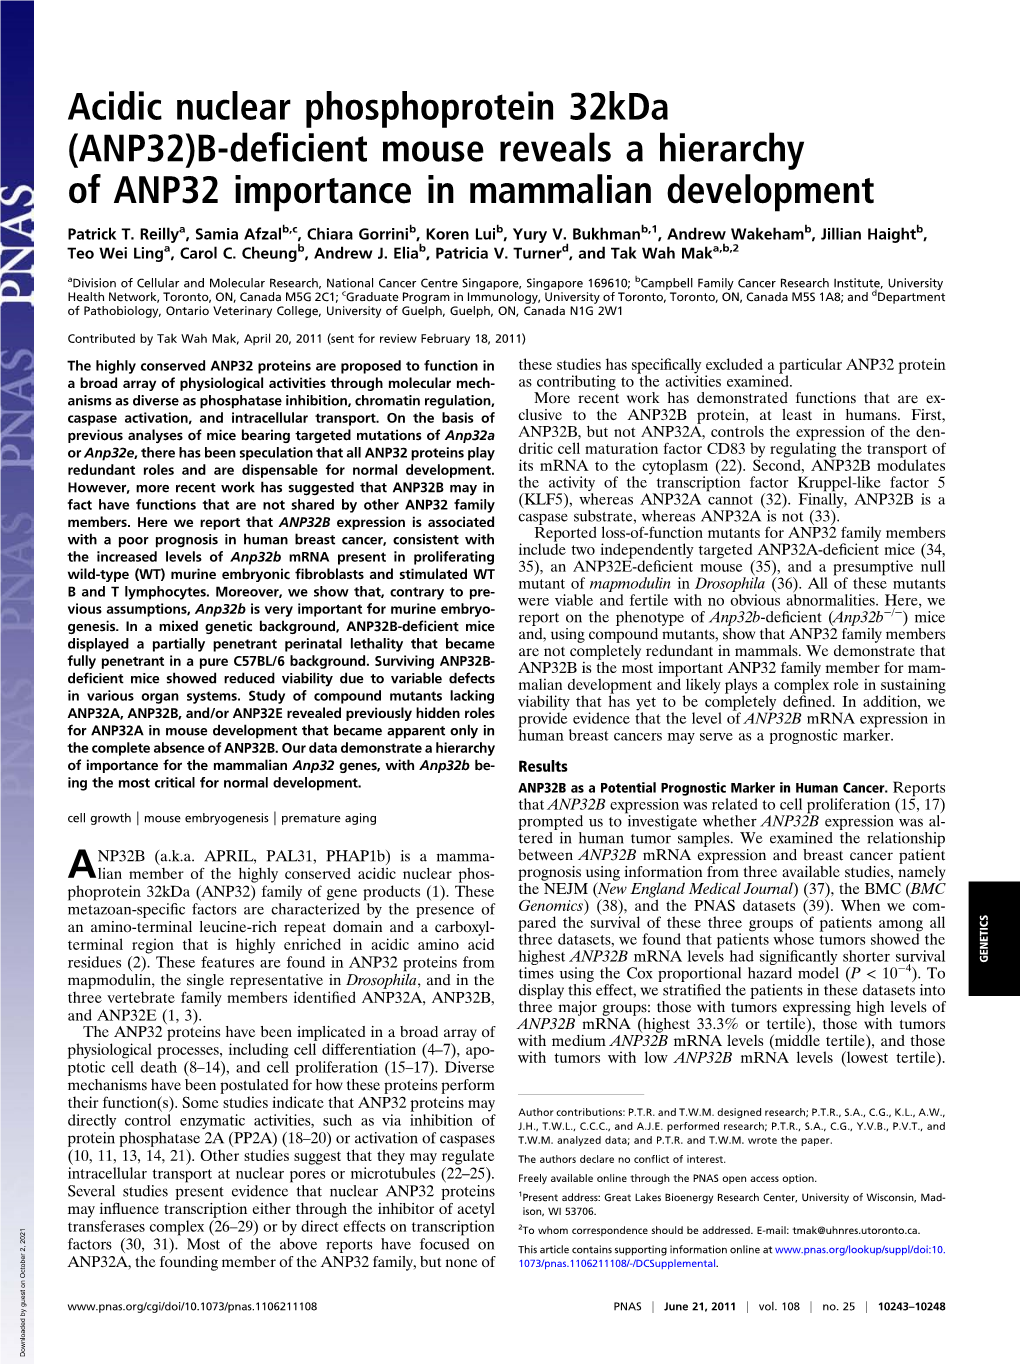 B-Deficient Mouse Reveals a Hierarchy of ANP32 Importance In